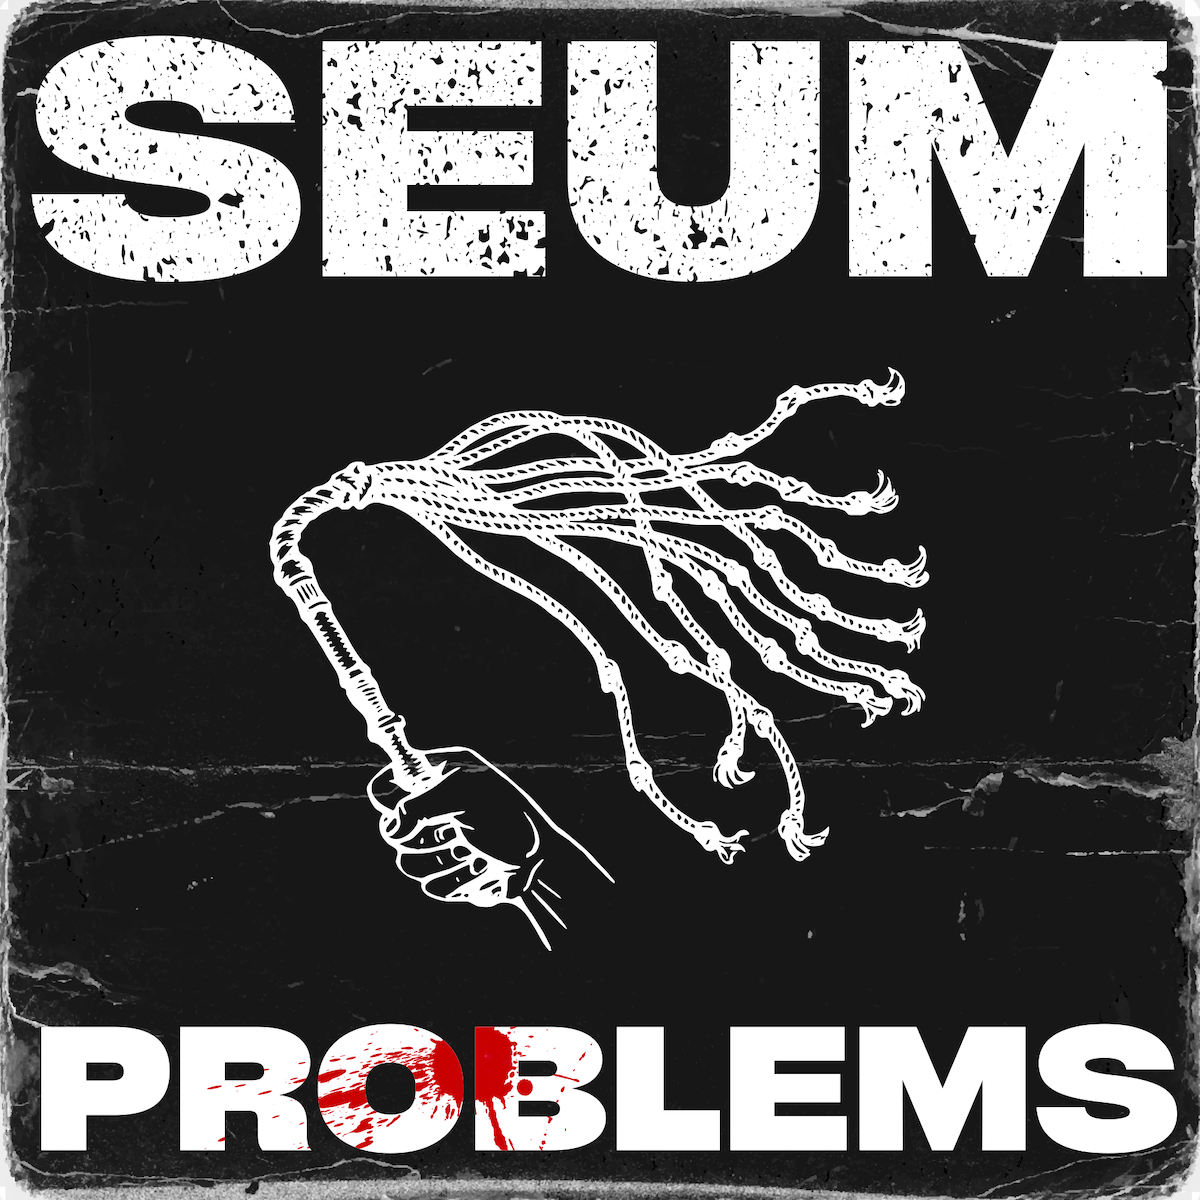 HOT TRACK: “Problems” by Seum